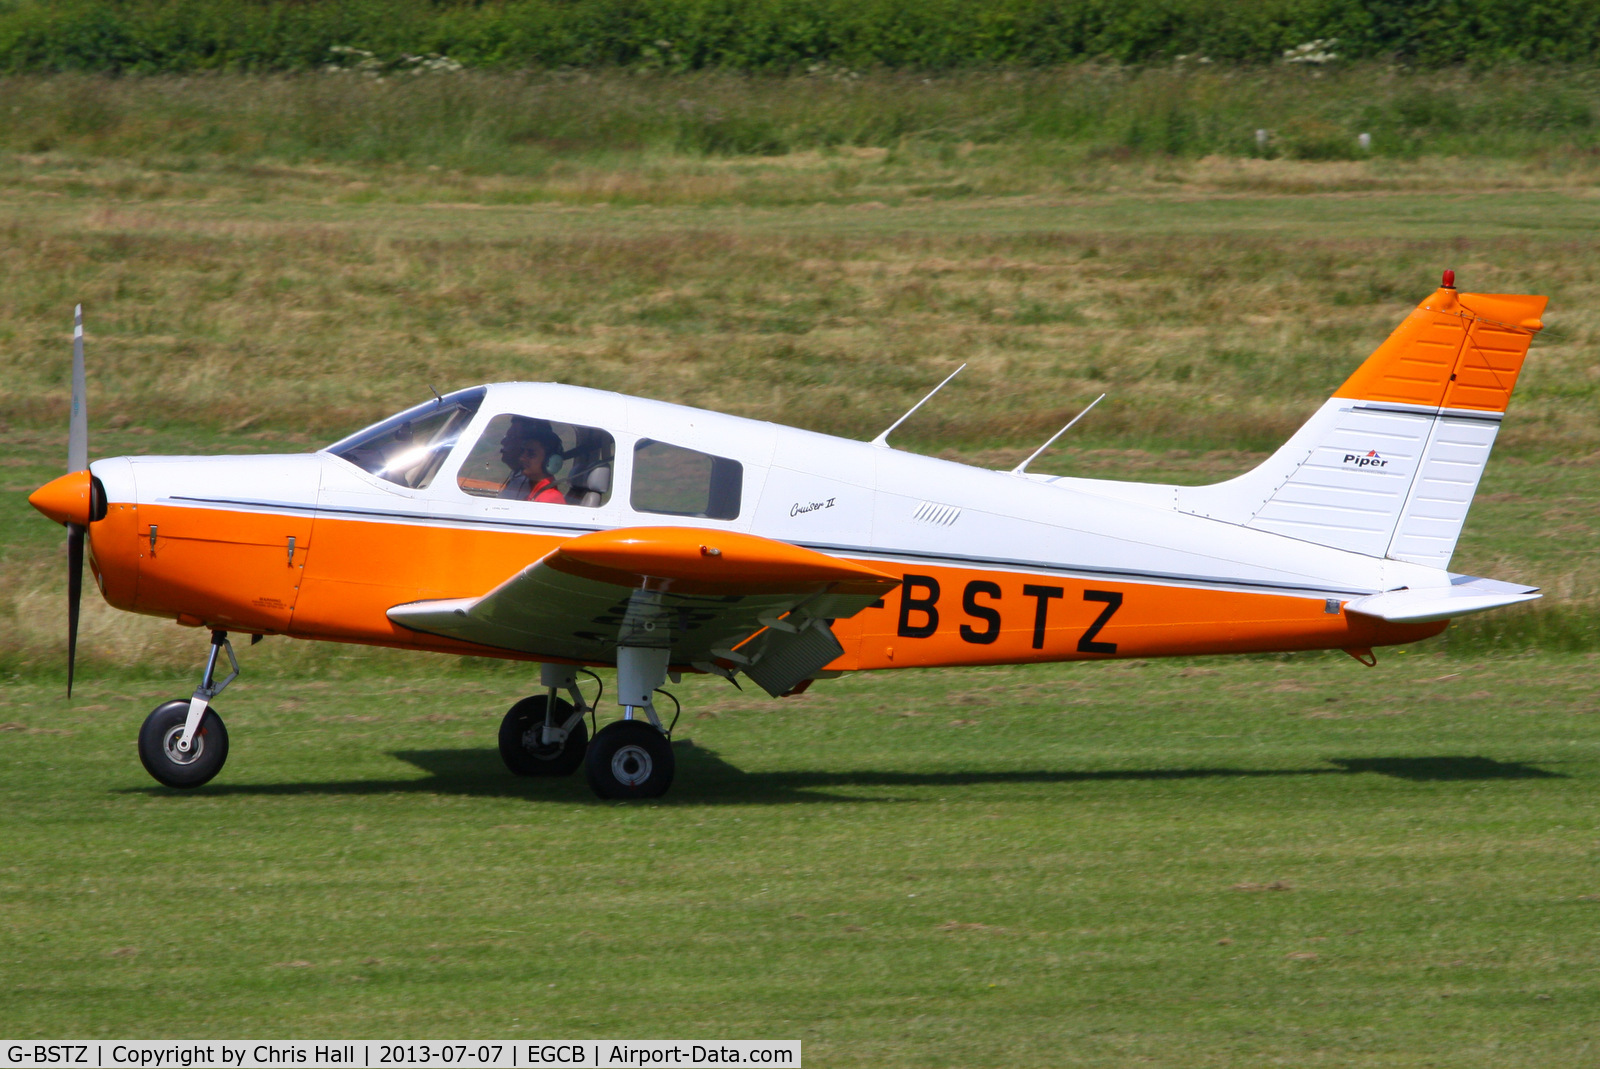 G-BSTZ, 1977 Piper PA-28-140 Cherokee Cruiser C/N 28-7725153, at the Barton open day and fly in